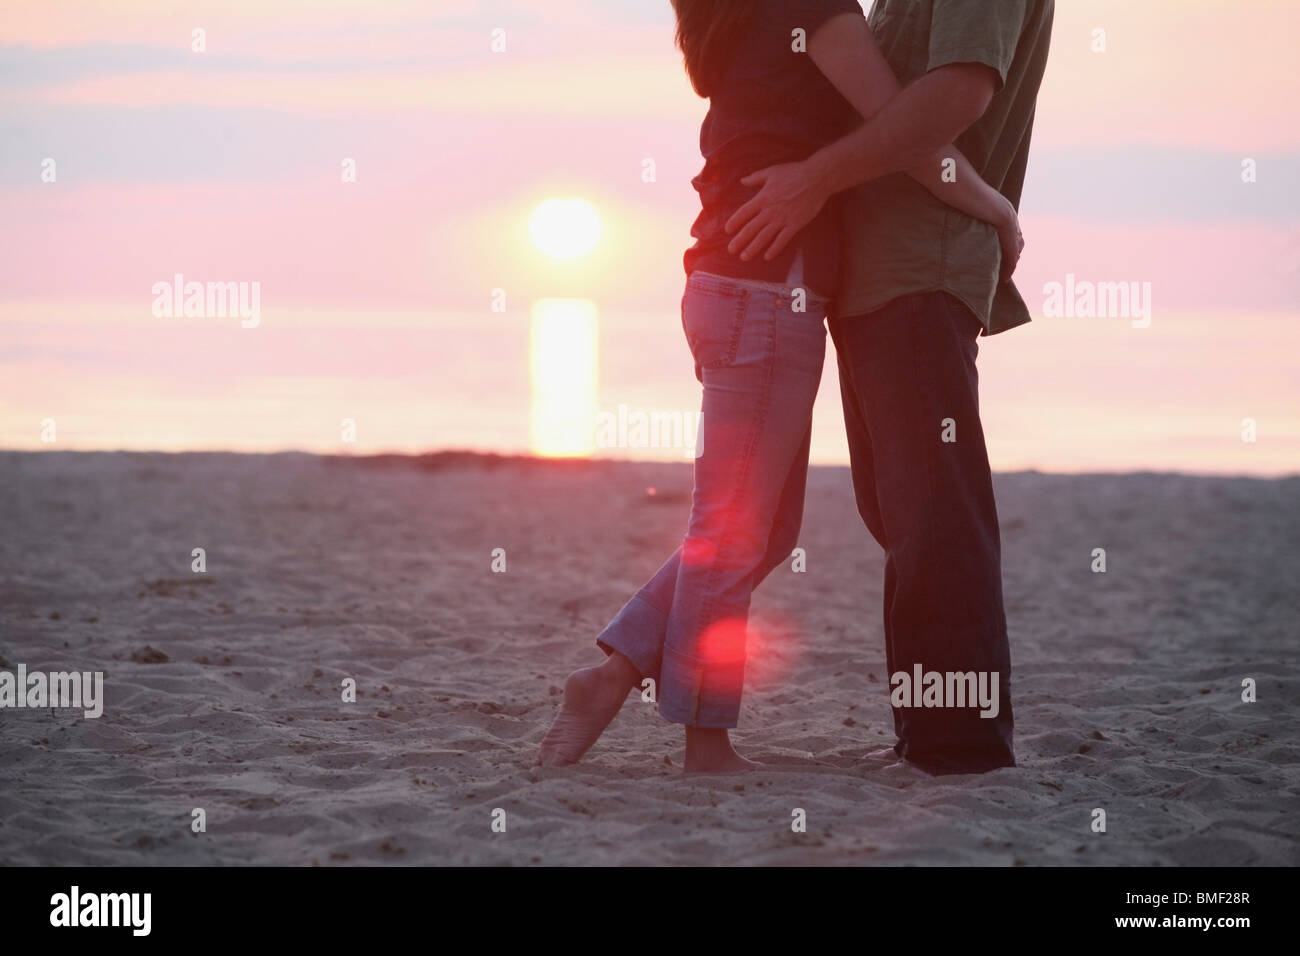 A Couple Standing Together On A Beach At Sunset Stock Photo